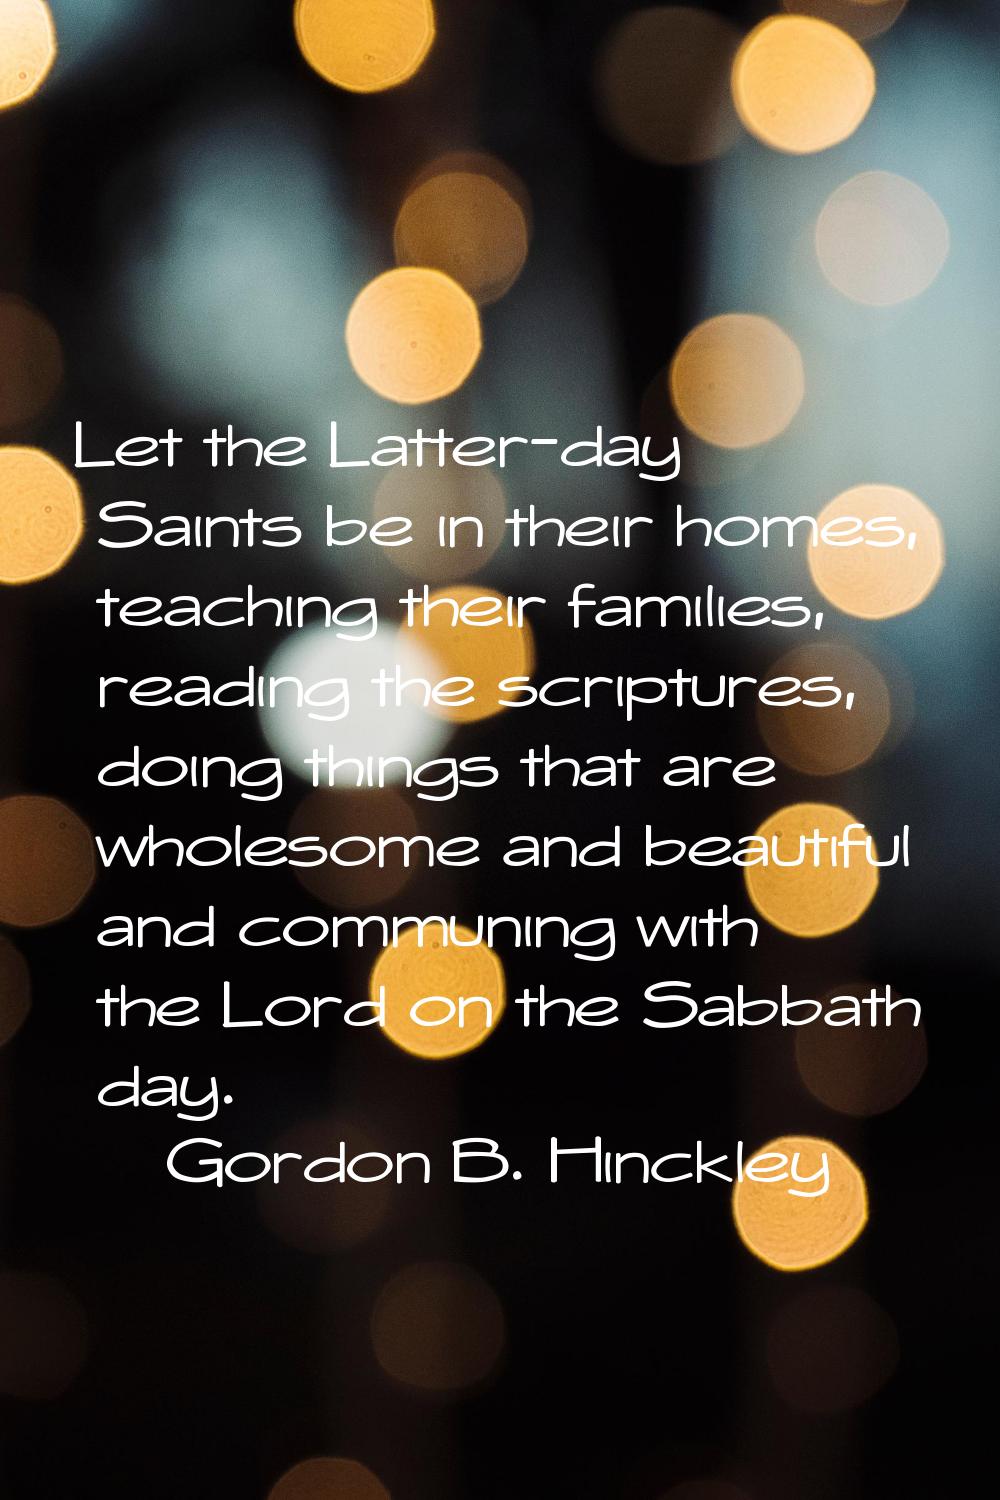 Let the Latter-day Saints be in their homes, teaching their families, reading the scriptures, doing